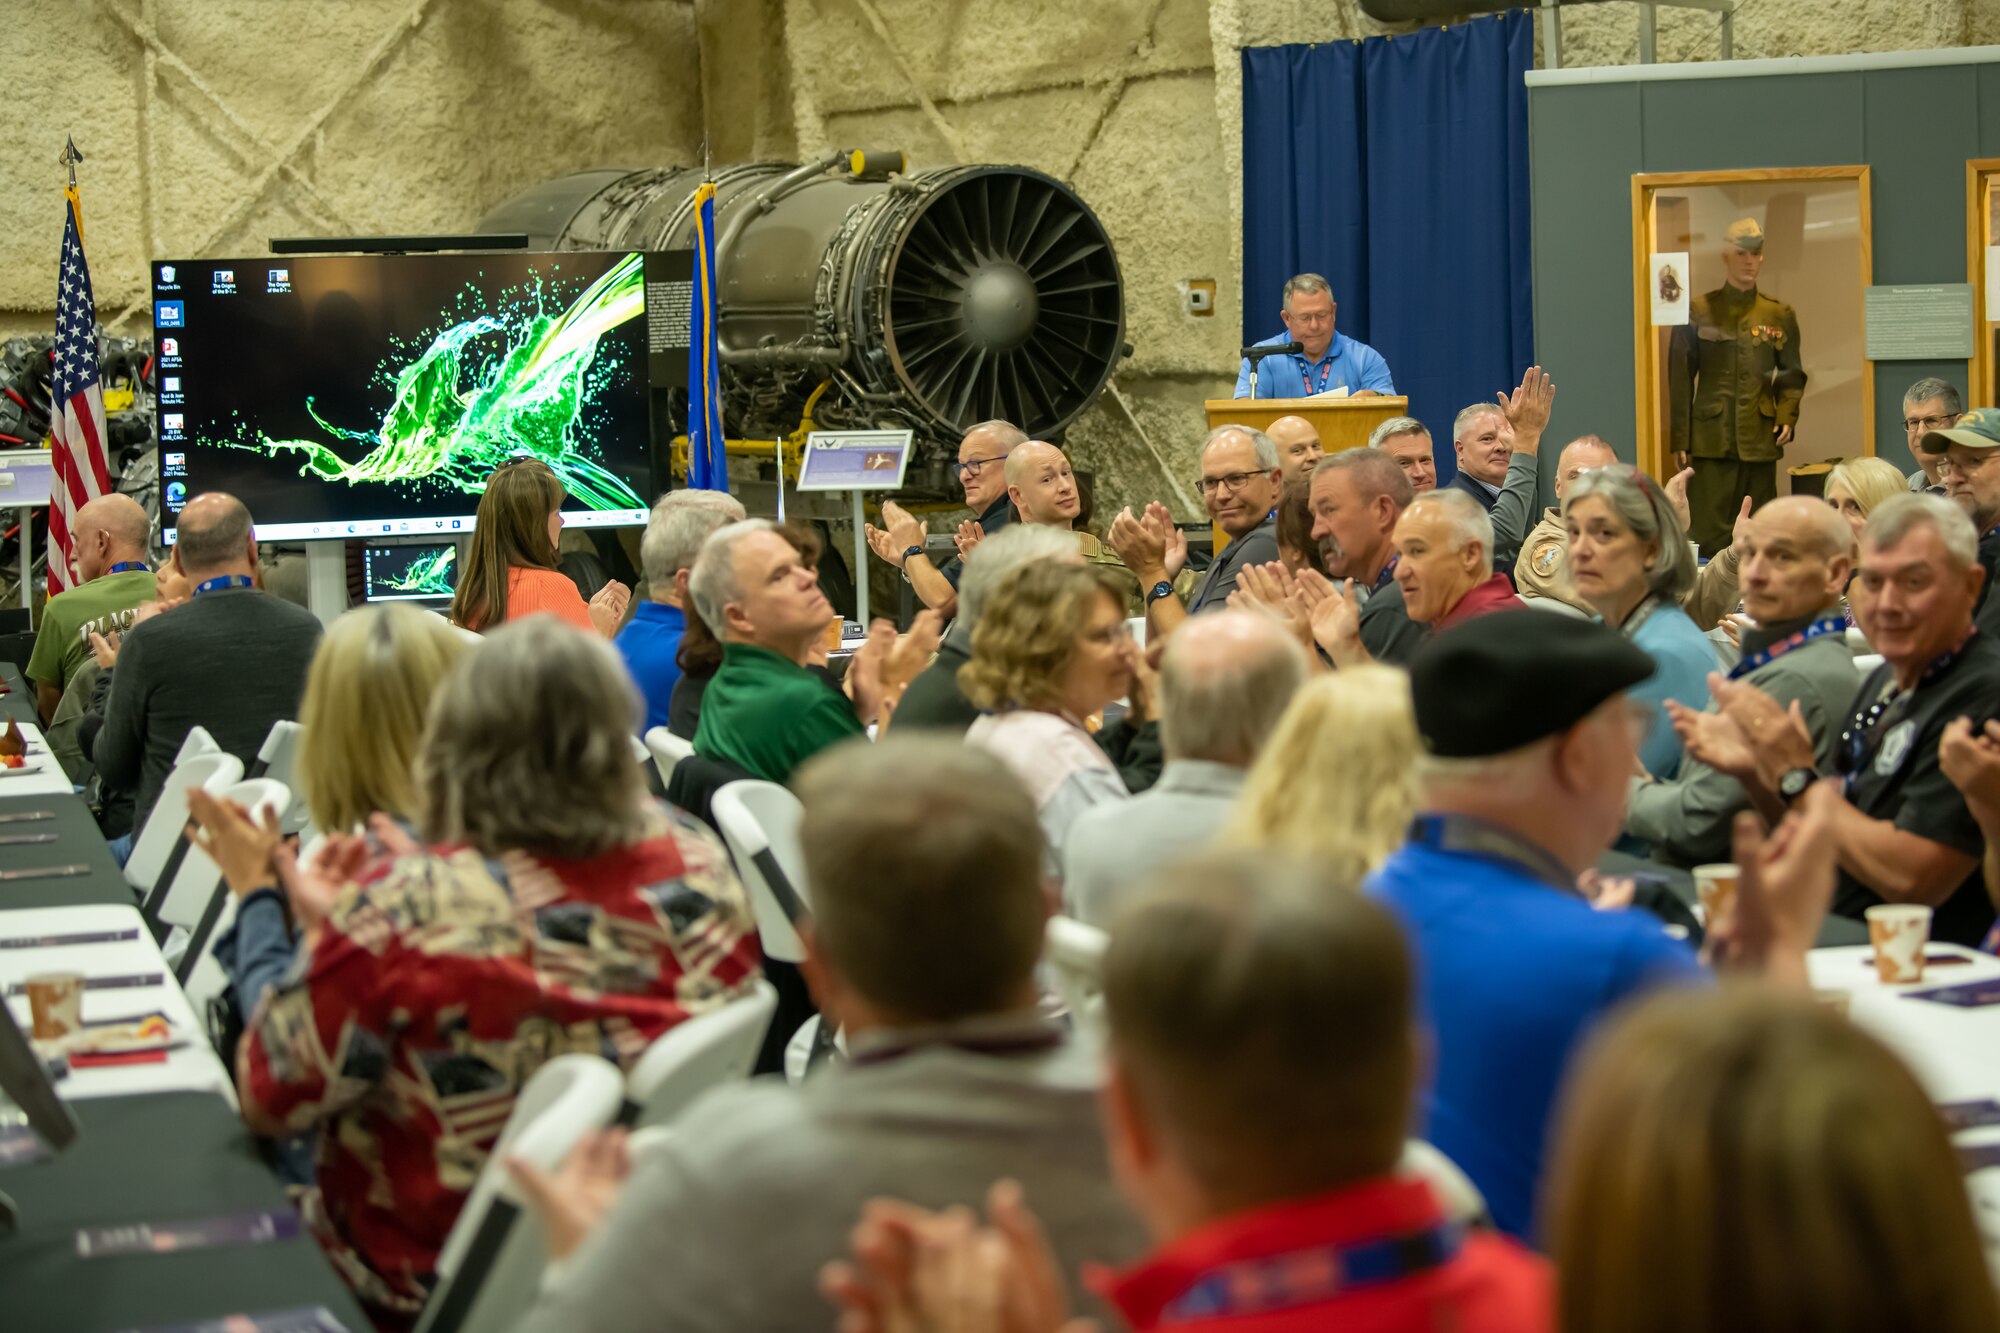 Members of the B-1 Bomber Association congregate for a reunion at the South Dakota Air and Space Museum in Box Elder, S.D., May 13, 2022. The association planned their reunion to tie into the 2022 Ellsworth Air and Space Show held on Ellsworth Air Force Base. (U.S. Air Force photo by Airman 1st Class Adam Olson)